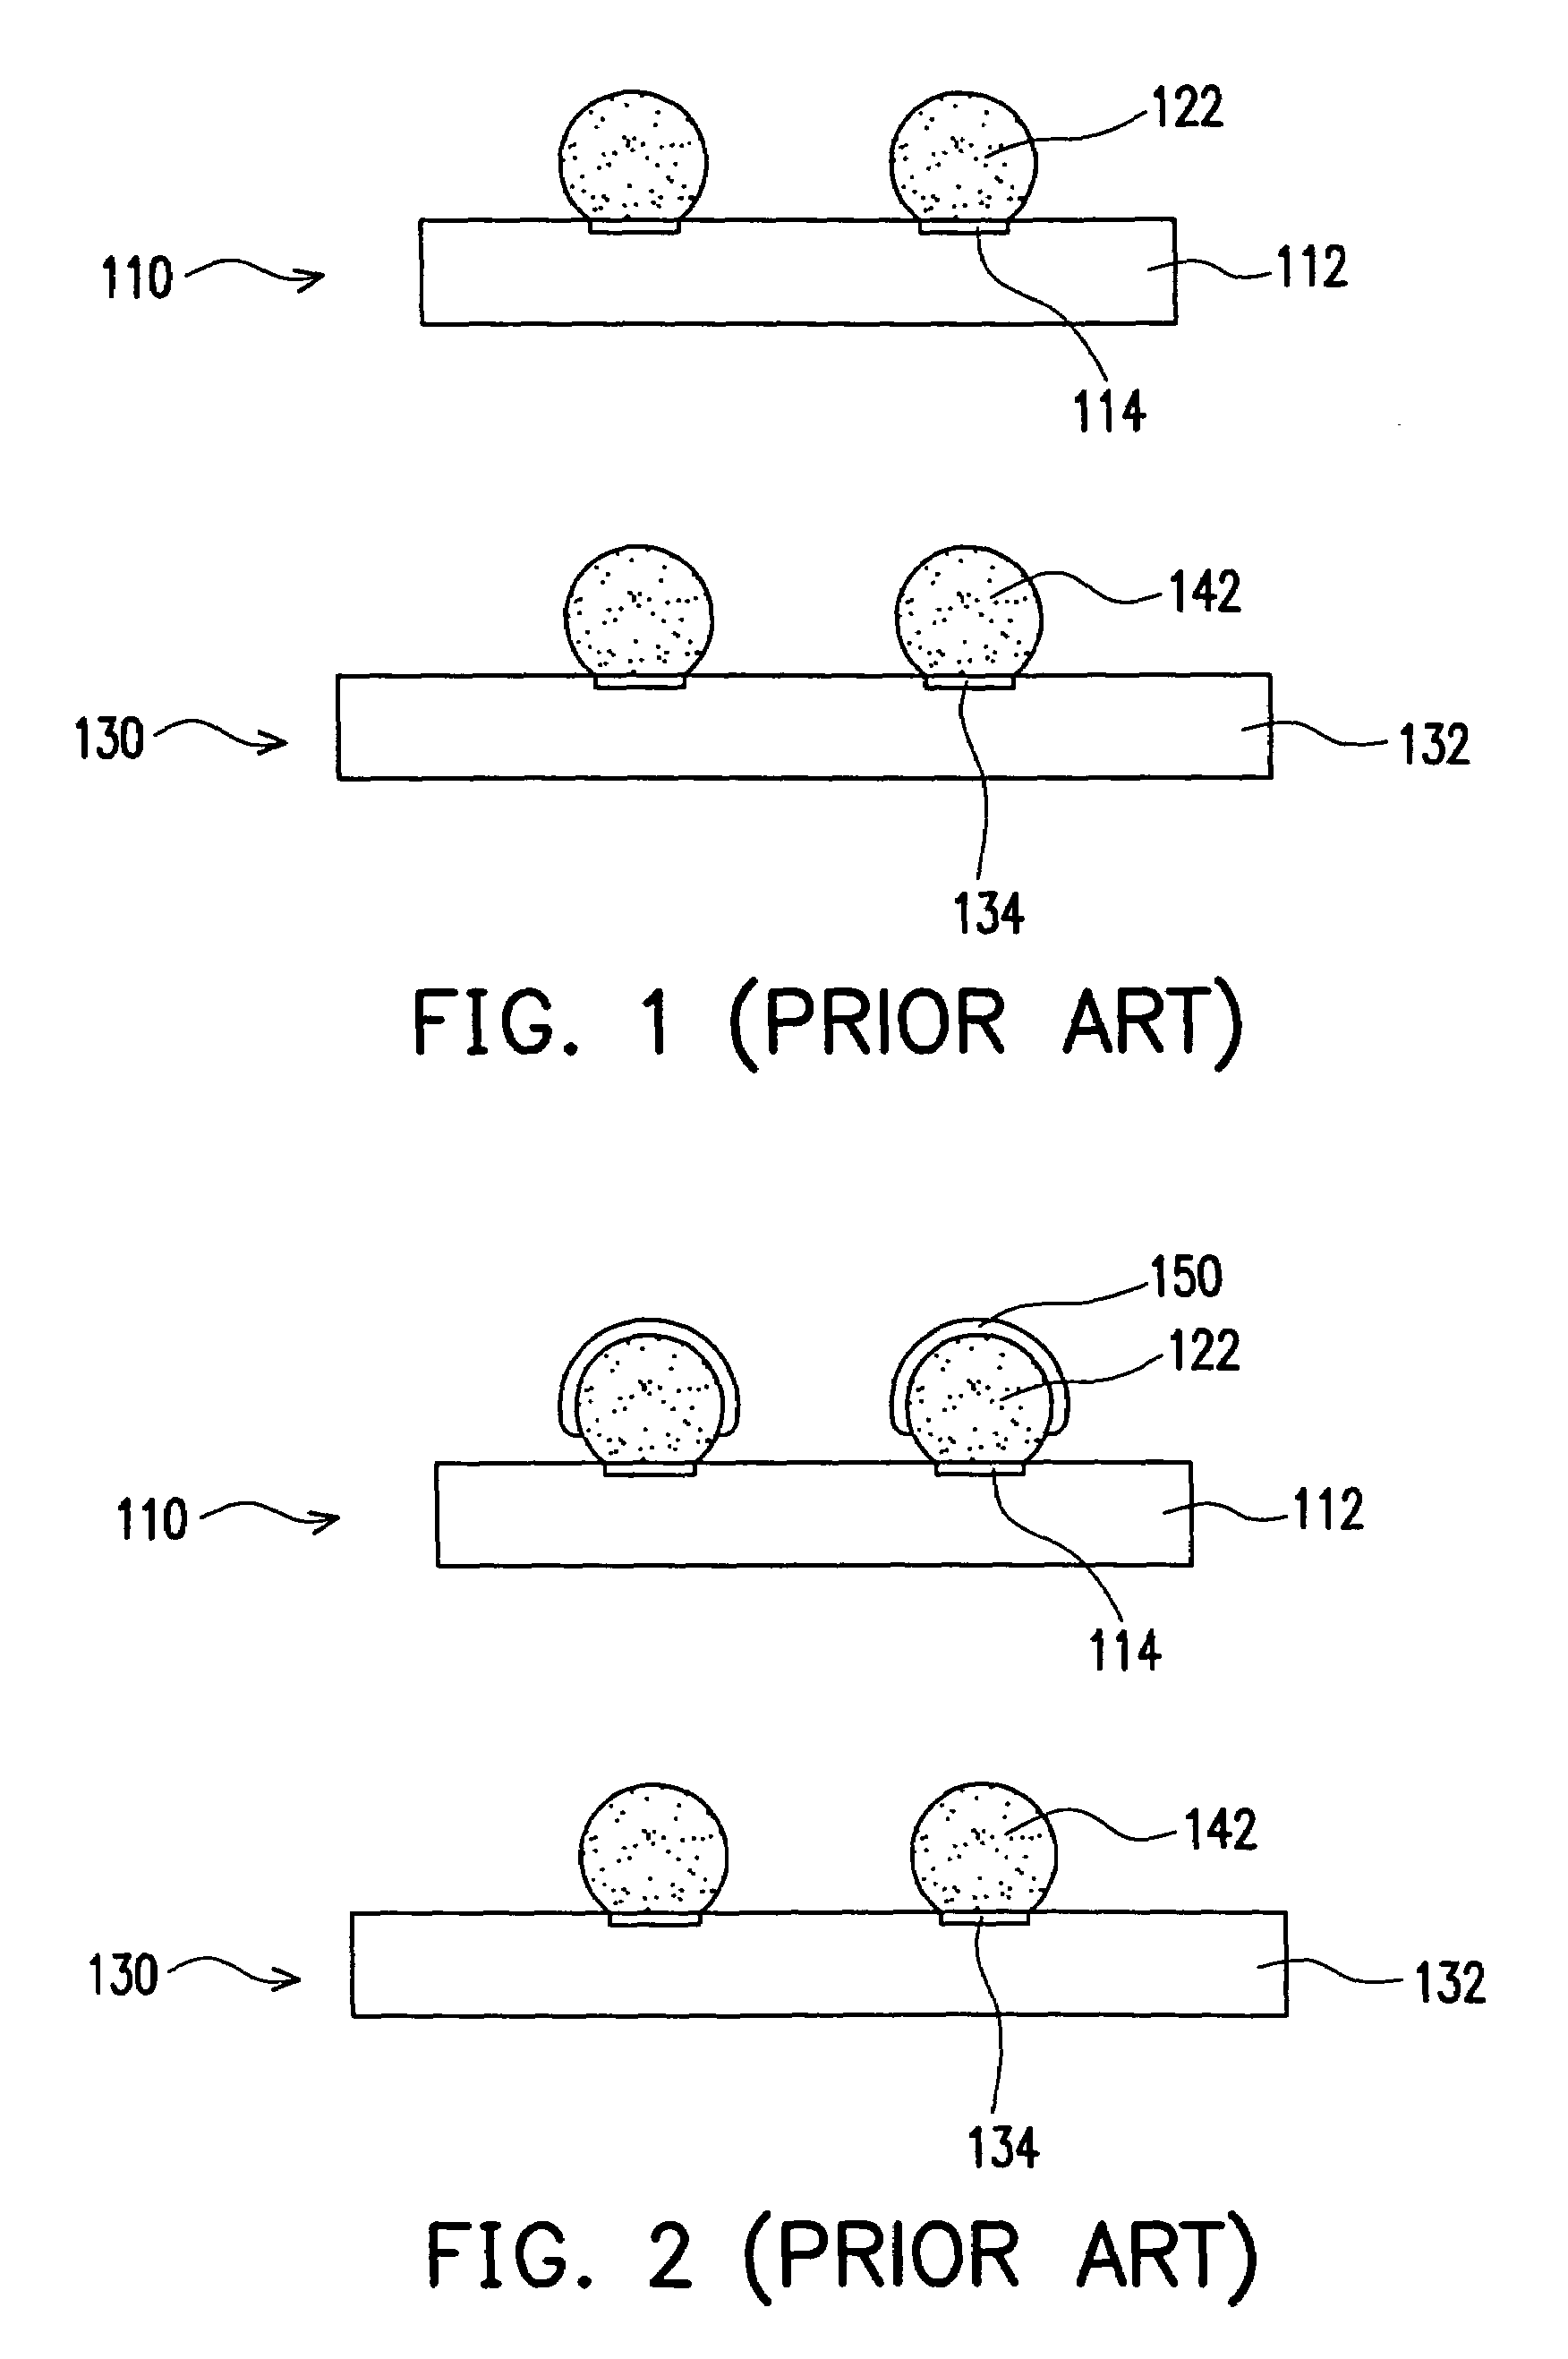 Circuit component with bump formed over chip